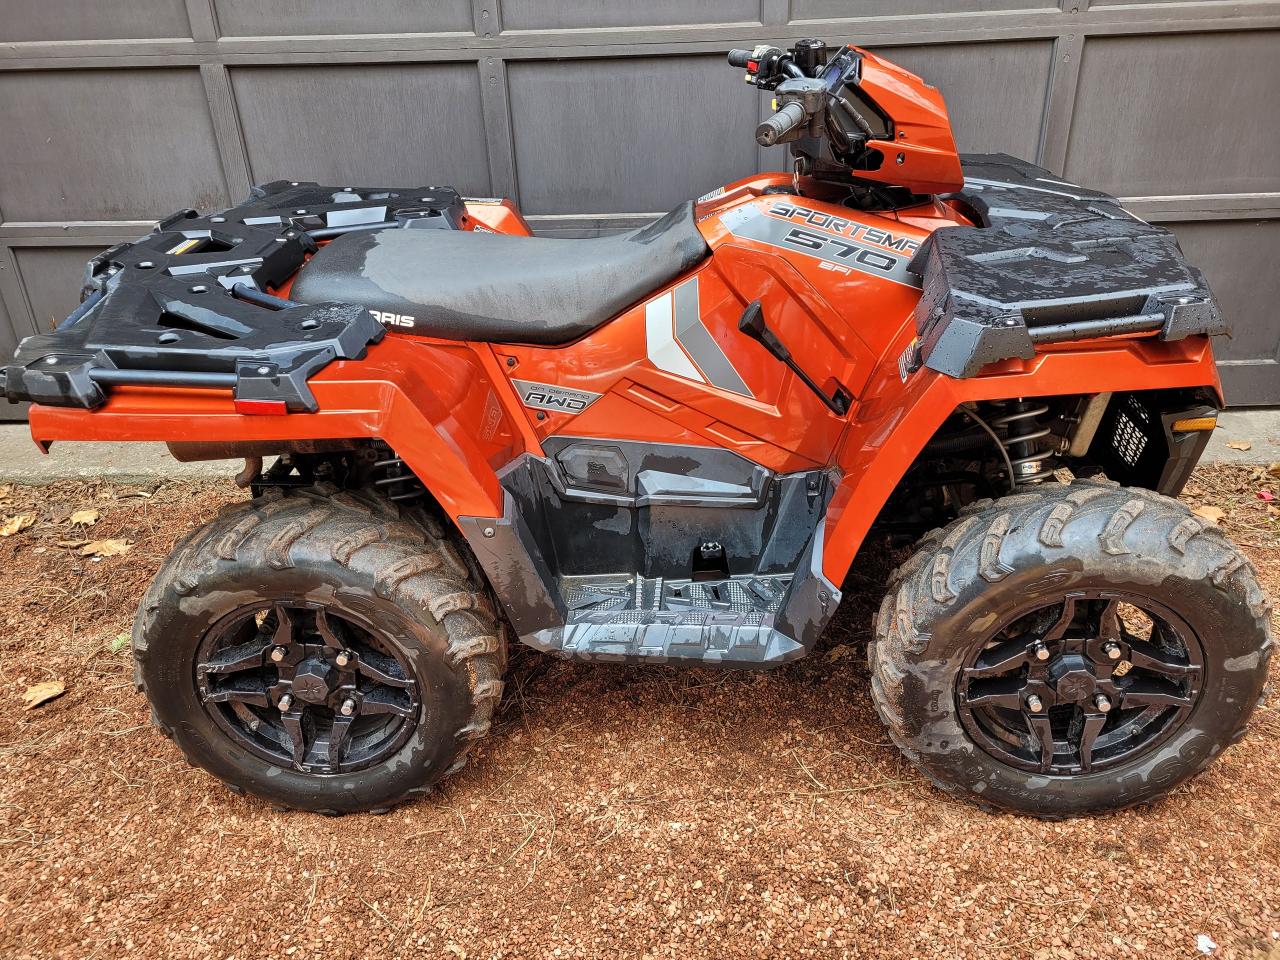 2020 Polaris Sportsman 570 EFI EPS *1-Owner* Financing Available & Trades-ins Welcome - Photo #5